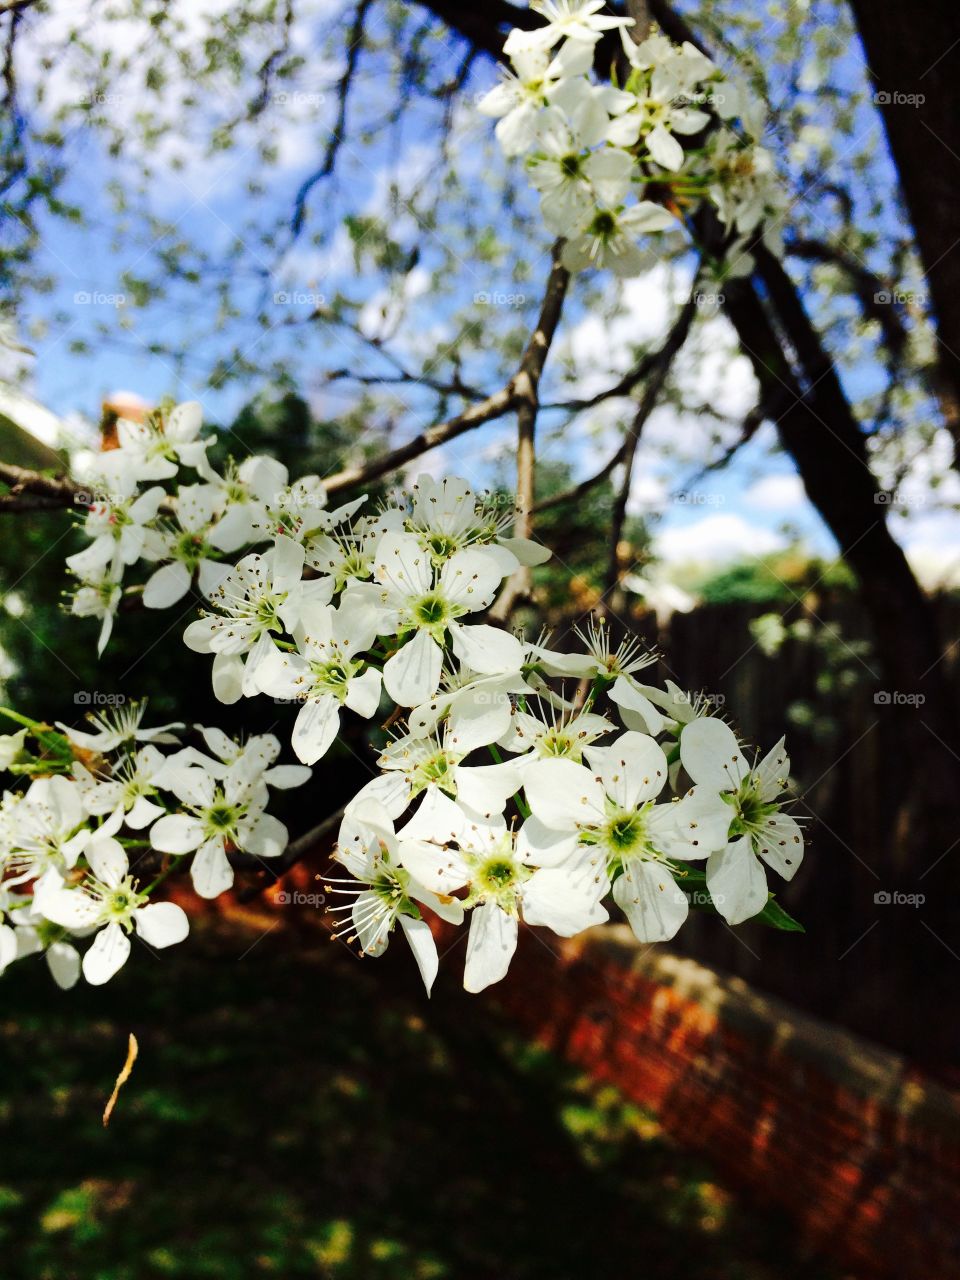 Bradford Pear Tree in bloom. I love this tree in my backyard. It's so beautiful in the springtime when it blooms. It looks like it's snow covered.